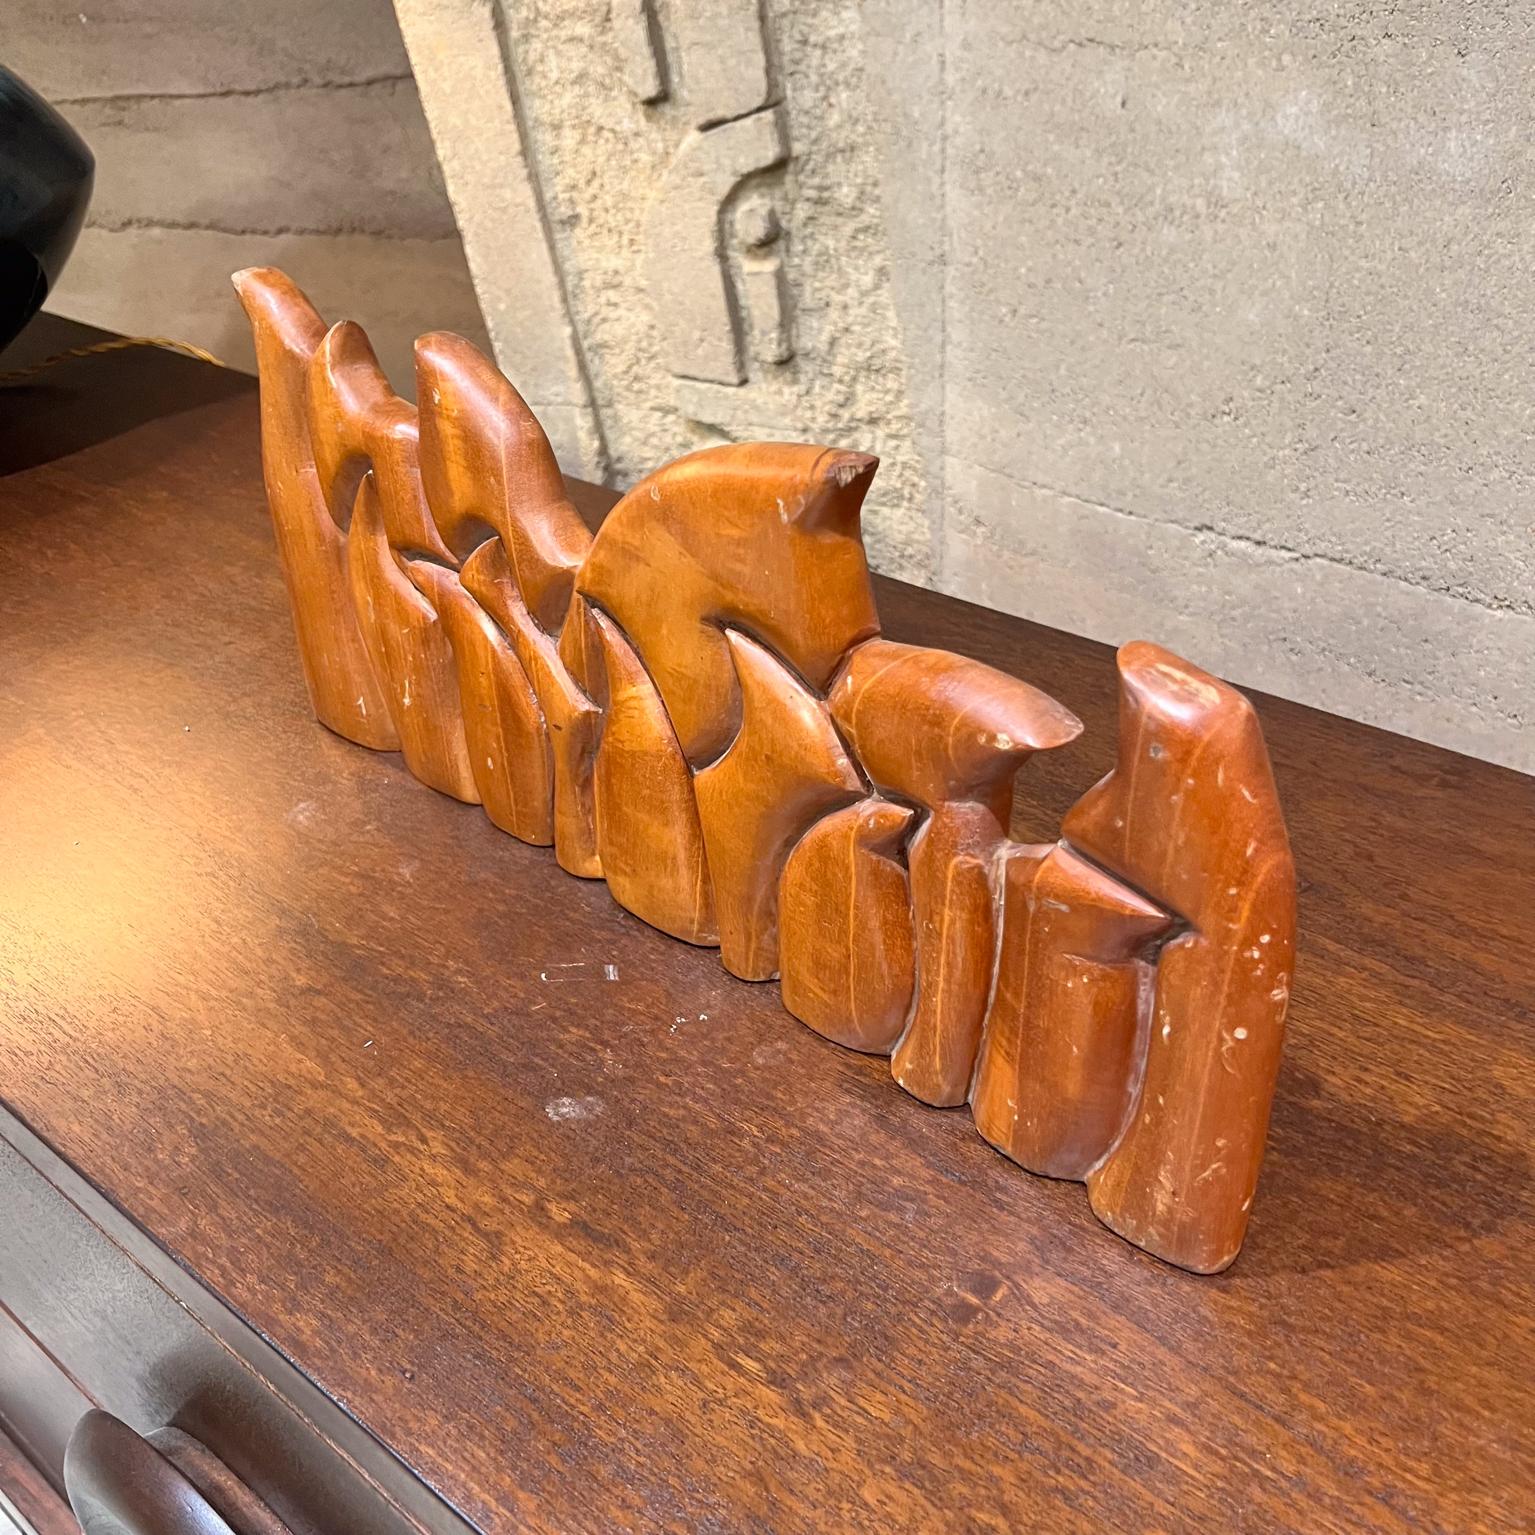 1999 Victor Rozo Last Supper Abstract Wood Sculpture Mexico DF For Sale 4